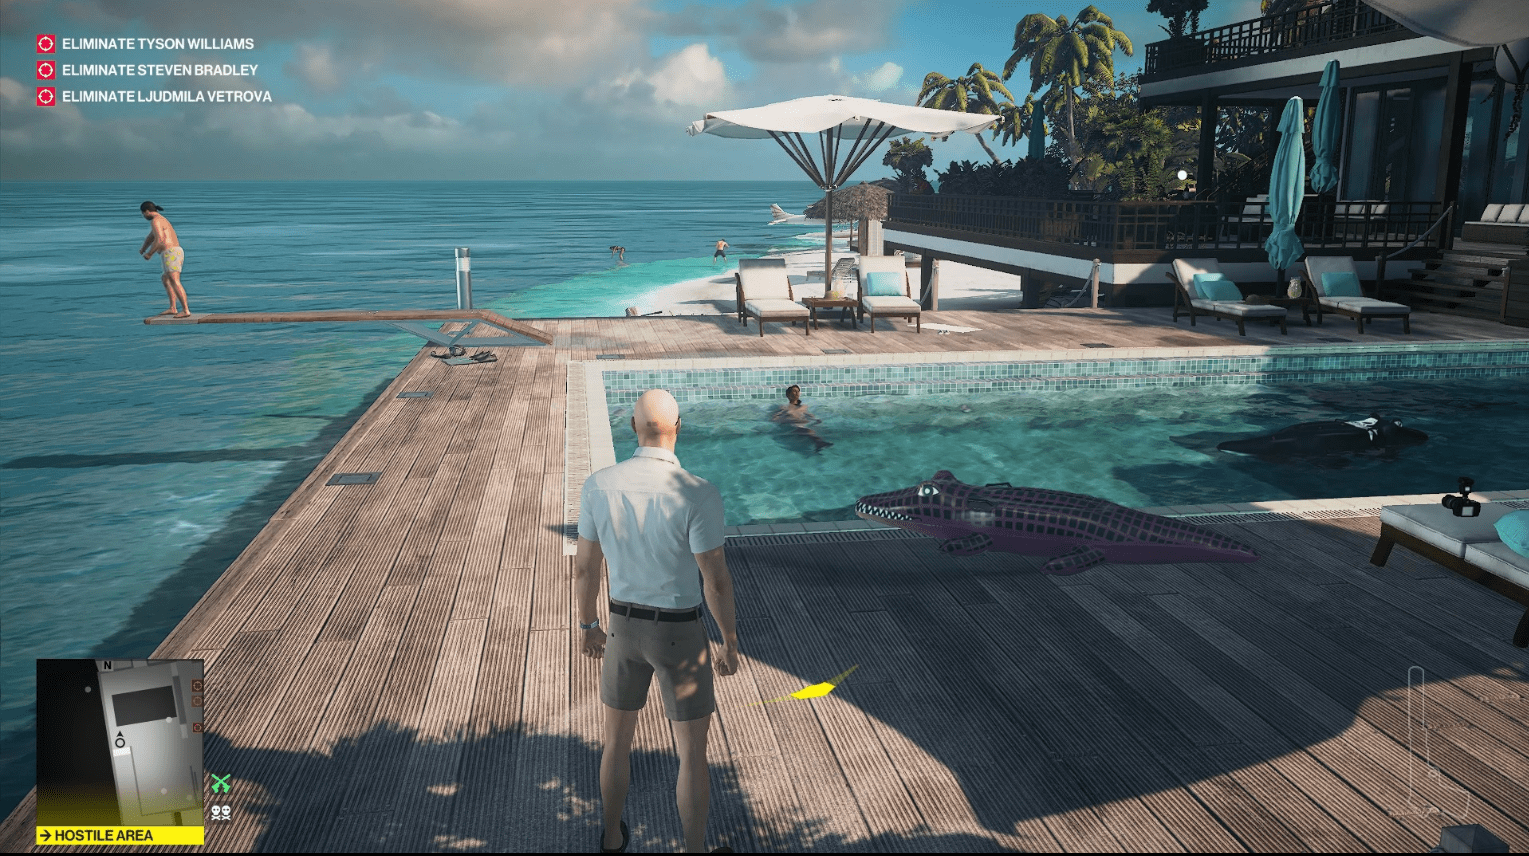 HITMAN 3 - All Redacted Challenges Gameplay Guide - Haven Island, Maldives / The Last Resort - BFED6B5